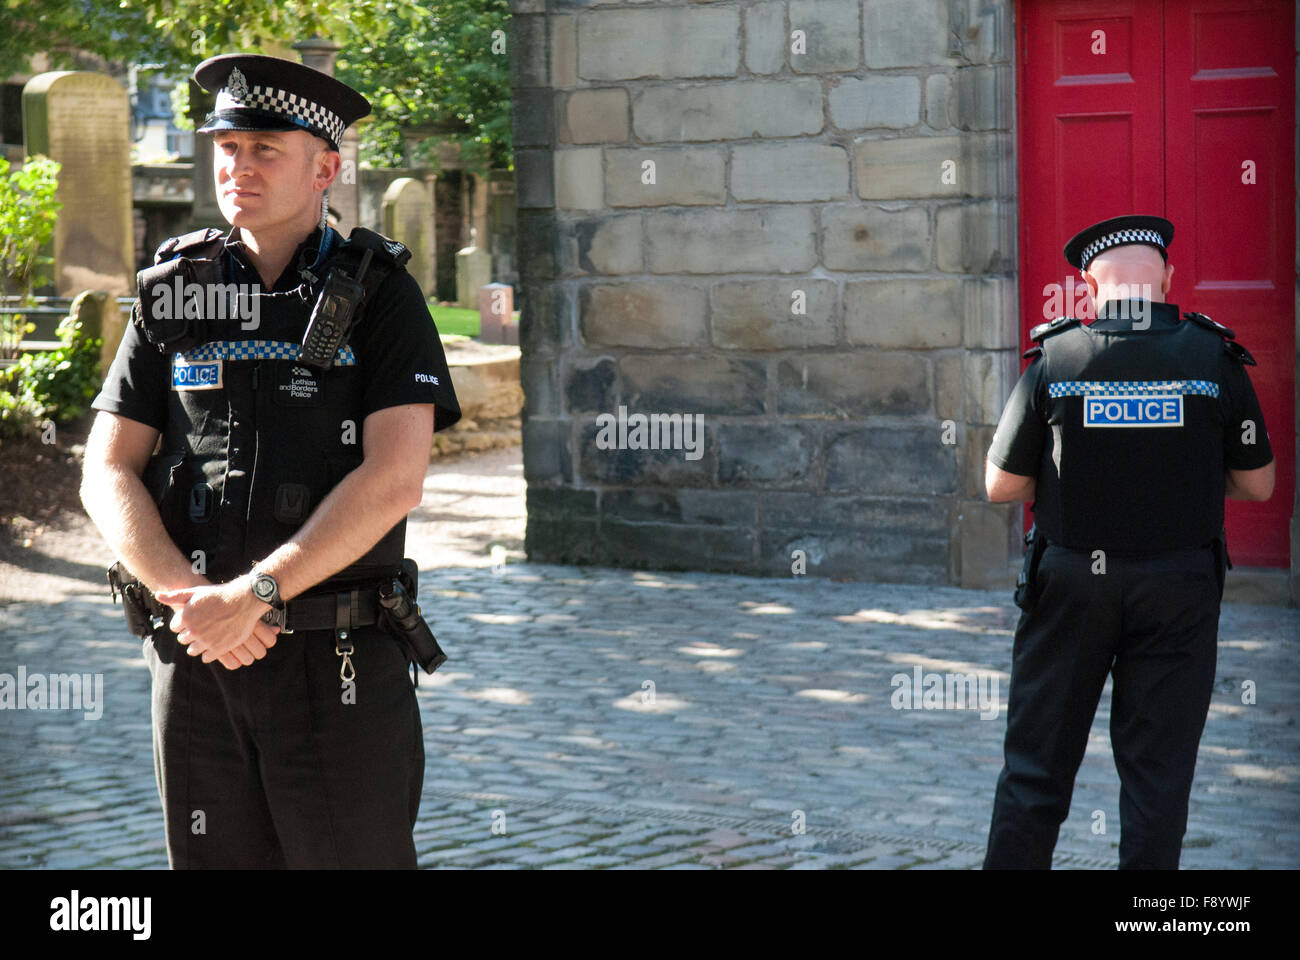 Police outside Canongate Kirk in Edinburgh, Scotland on 29th July 2011 before the wedding of Zara Philips and Mike Tindall. Stock Photo